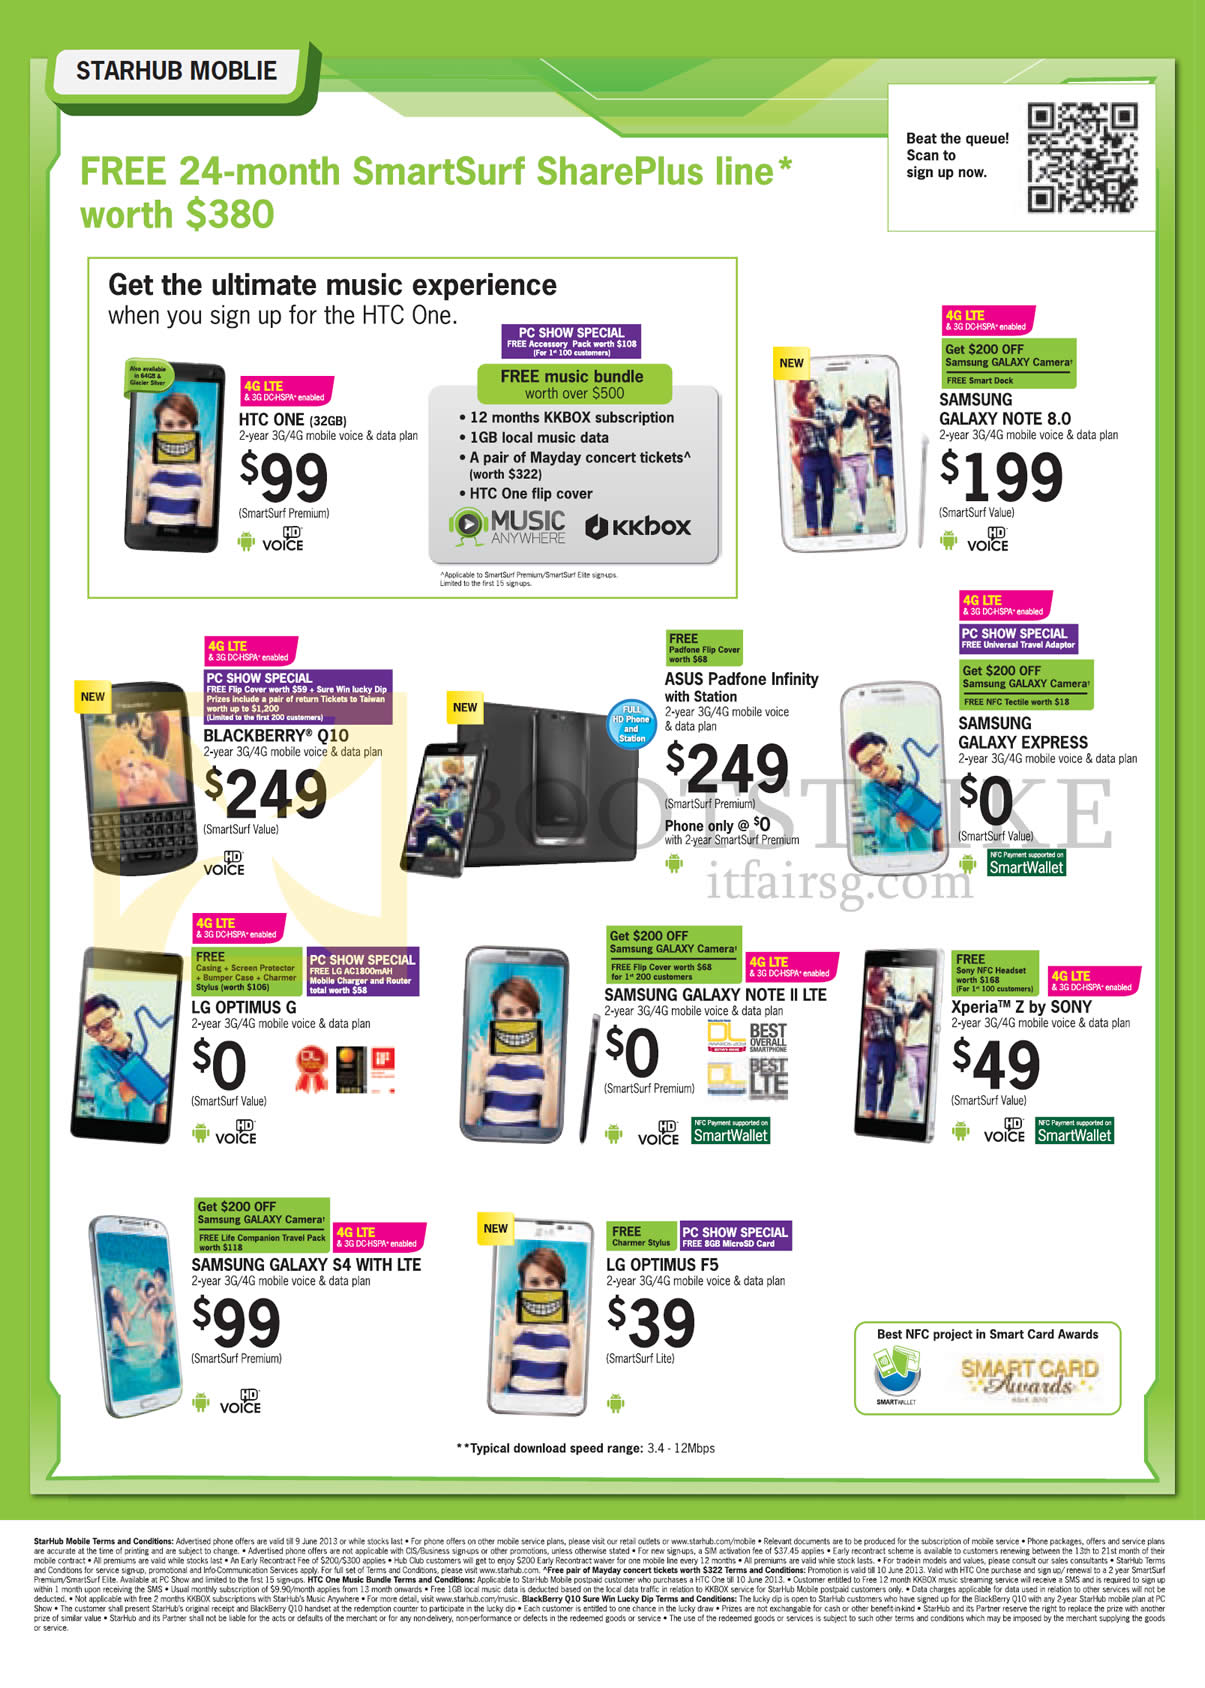 PC SHOW 2013 price list image brochure of Starhub Mobile HTC One, Samsung Galaxy Note 8.0, Express, S4, Note II LTE, Blackberry Q10, ASUS Padfone Infinity, LG Optimus G, F5, Sony Xperia Z